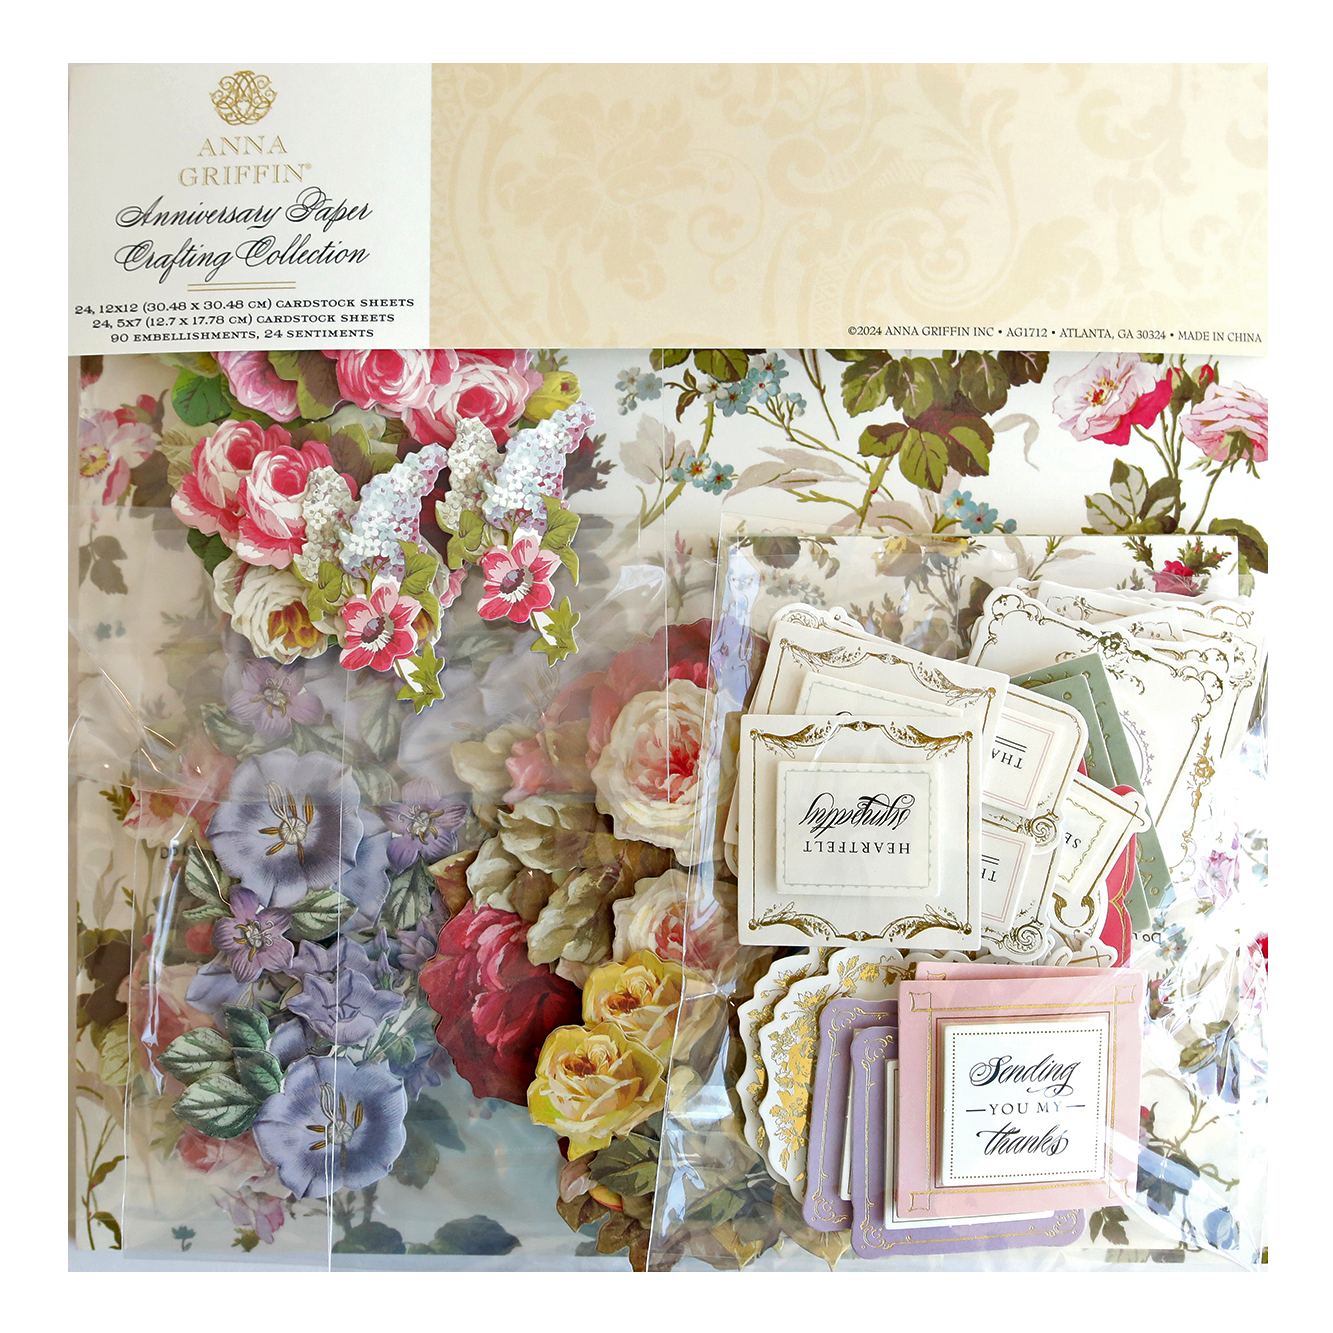 A package containing the Anniversary Paper Crafting Collection, a variety of floral designs and double sided cardstock.